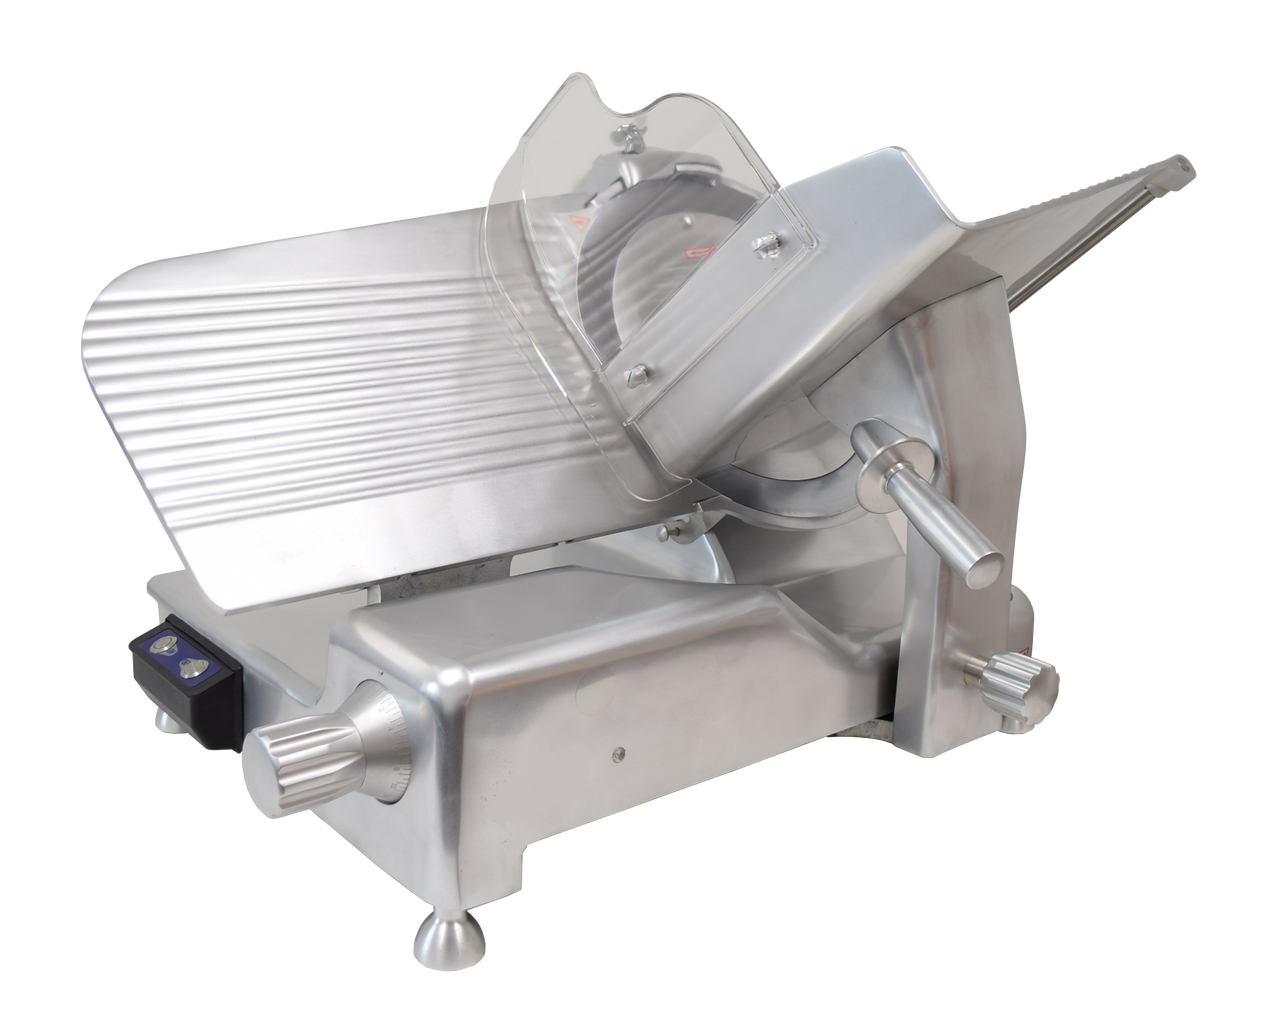 American Eagle Heavy Duty 14" Commercial Meat Slicer, 3/4HP, AE-MS14